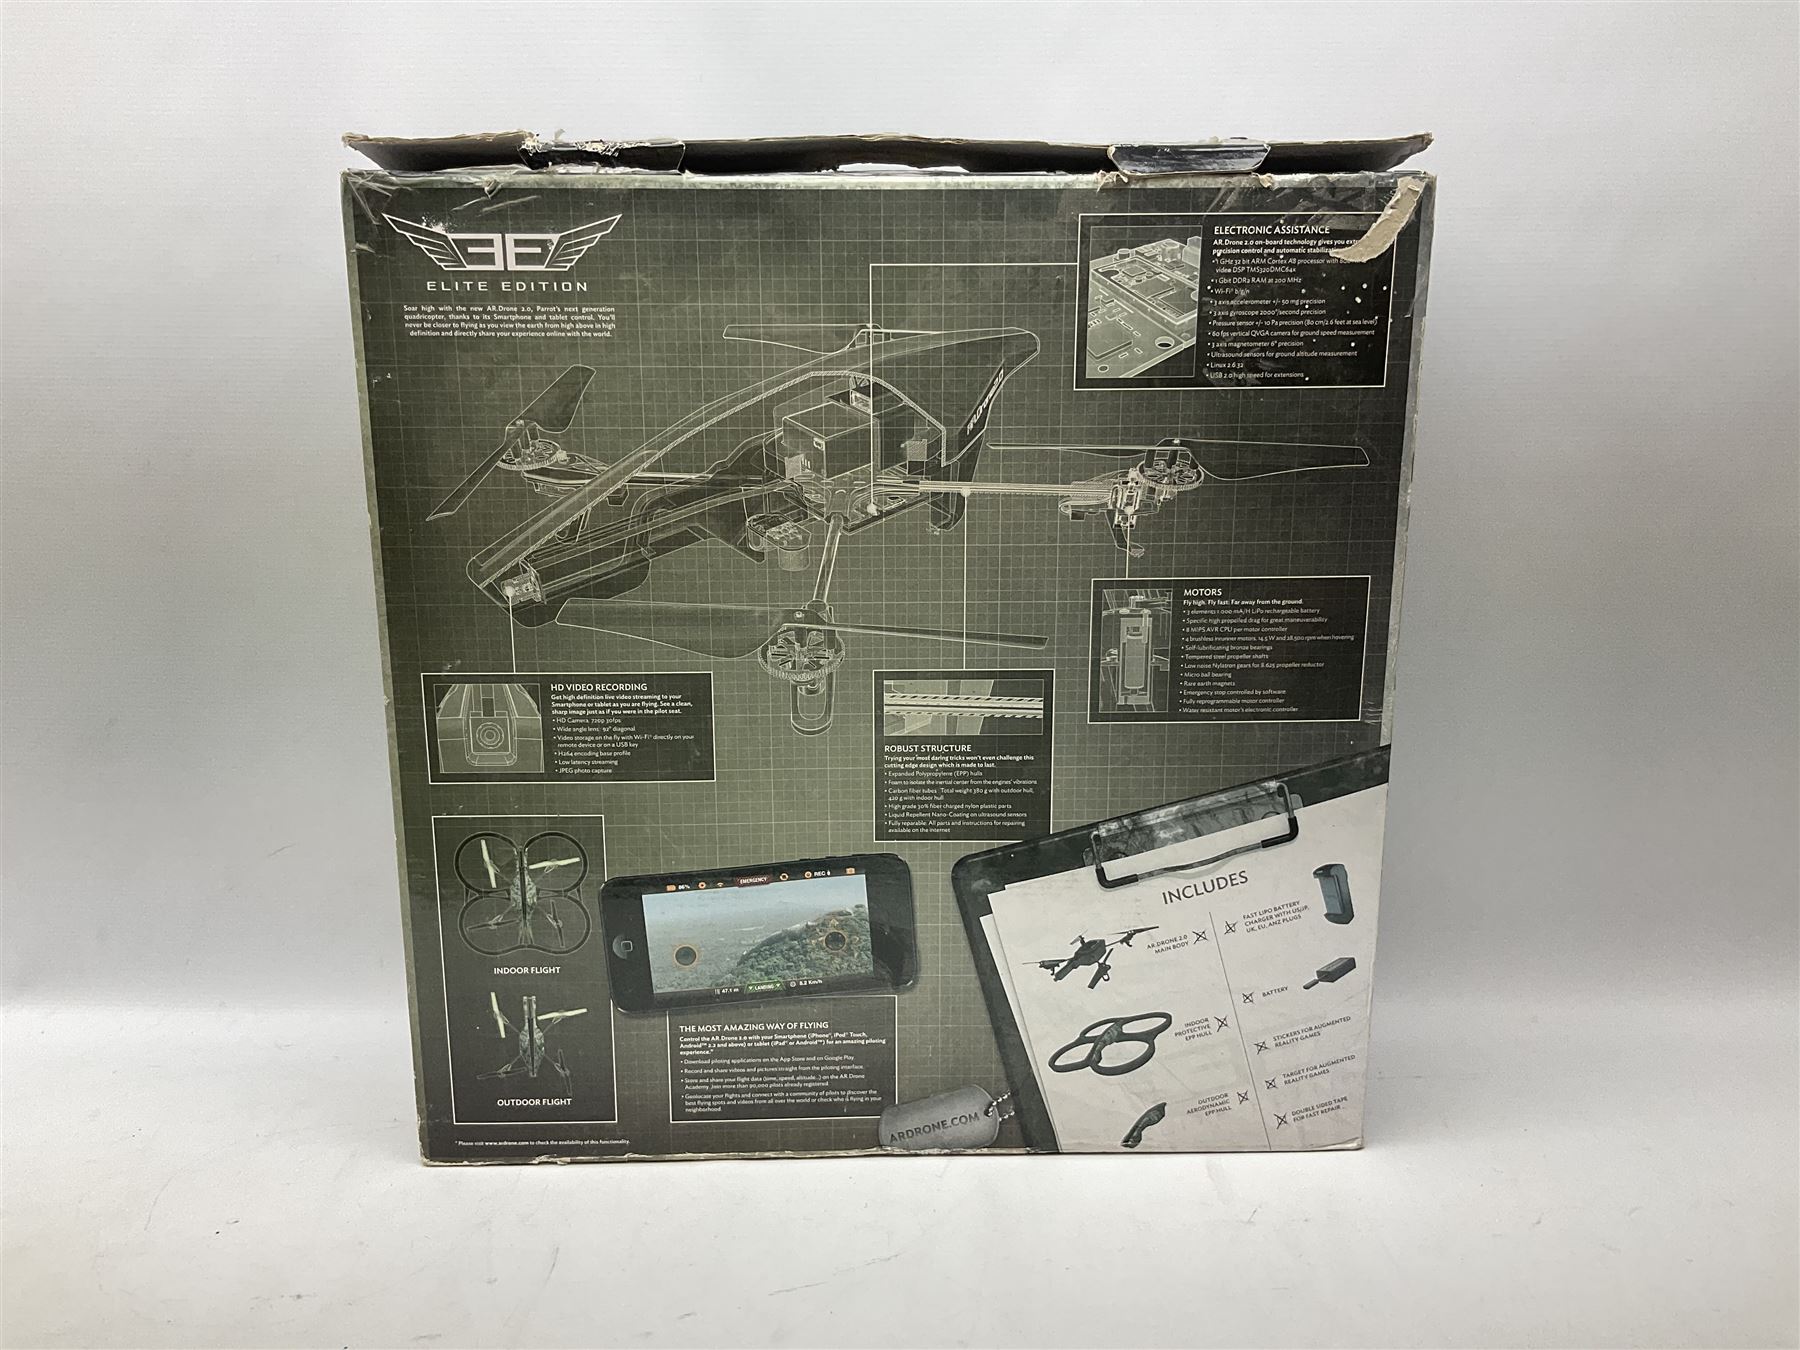 Parrot AR Drone 2.0 Elite Edition; boxed - Image 5 of 5